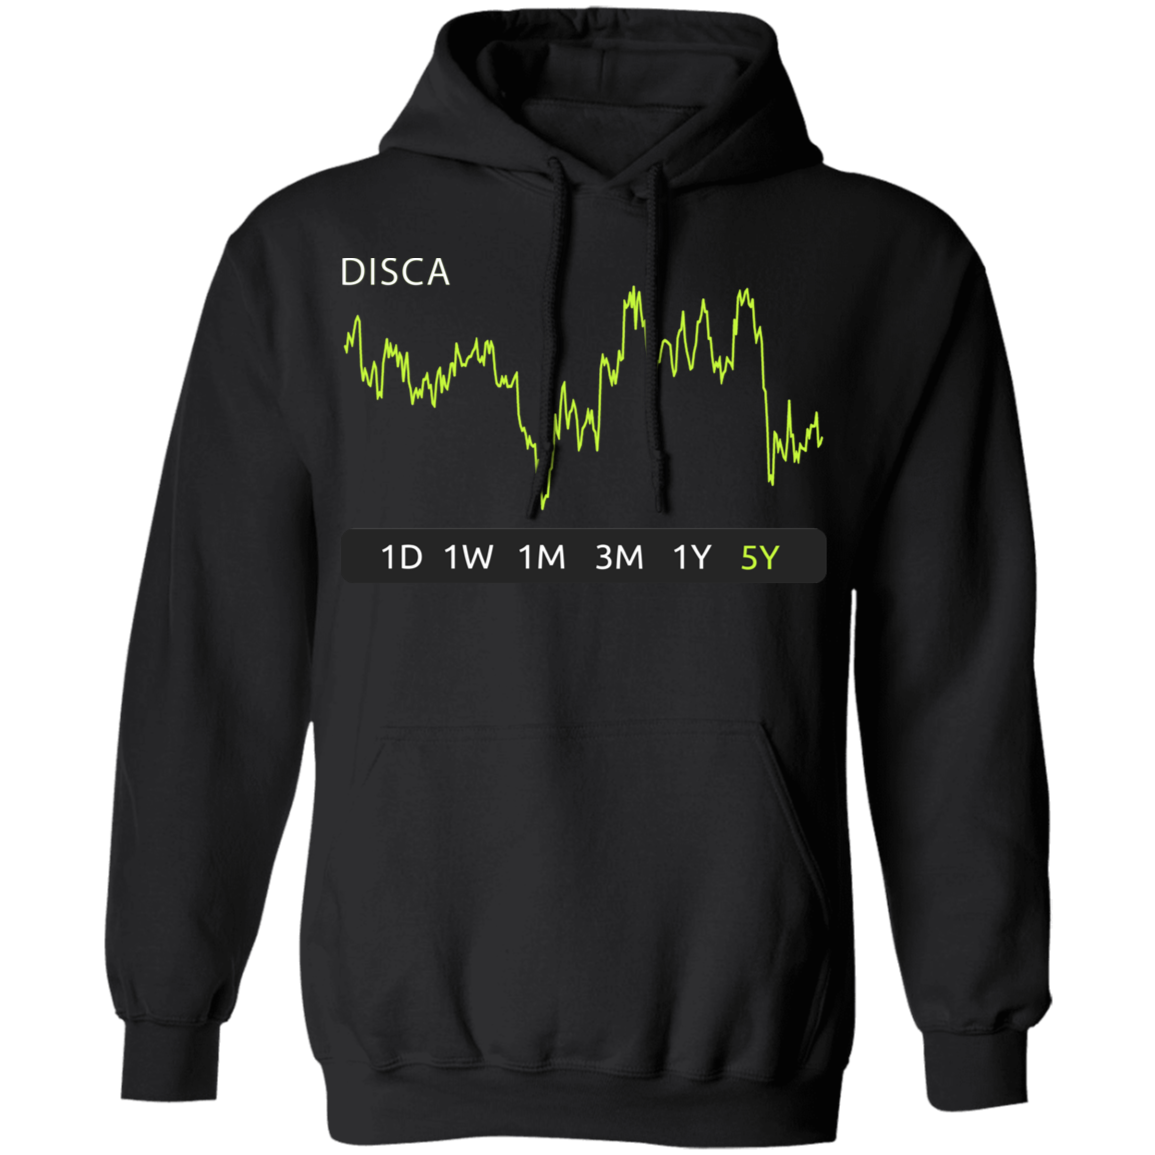 DISCA Stock 5y Pullover Hoodie